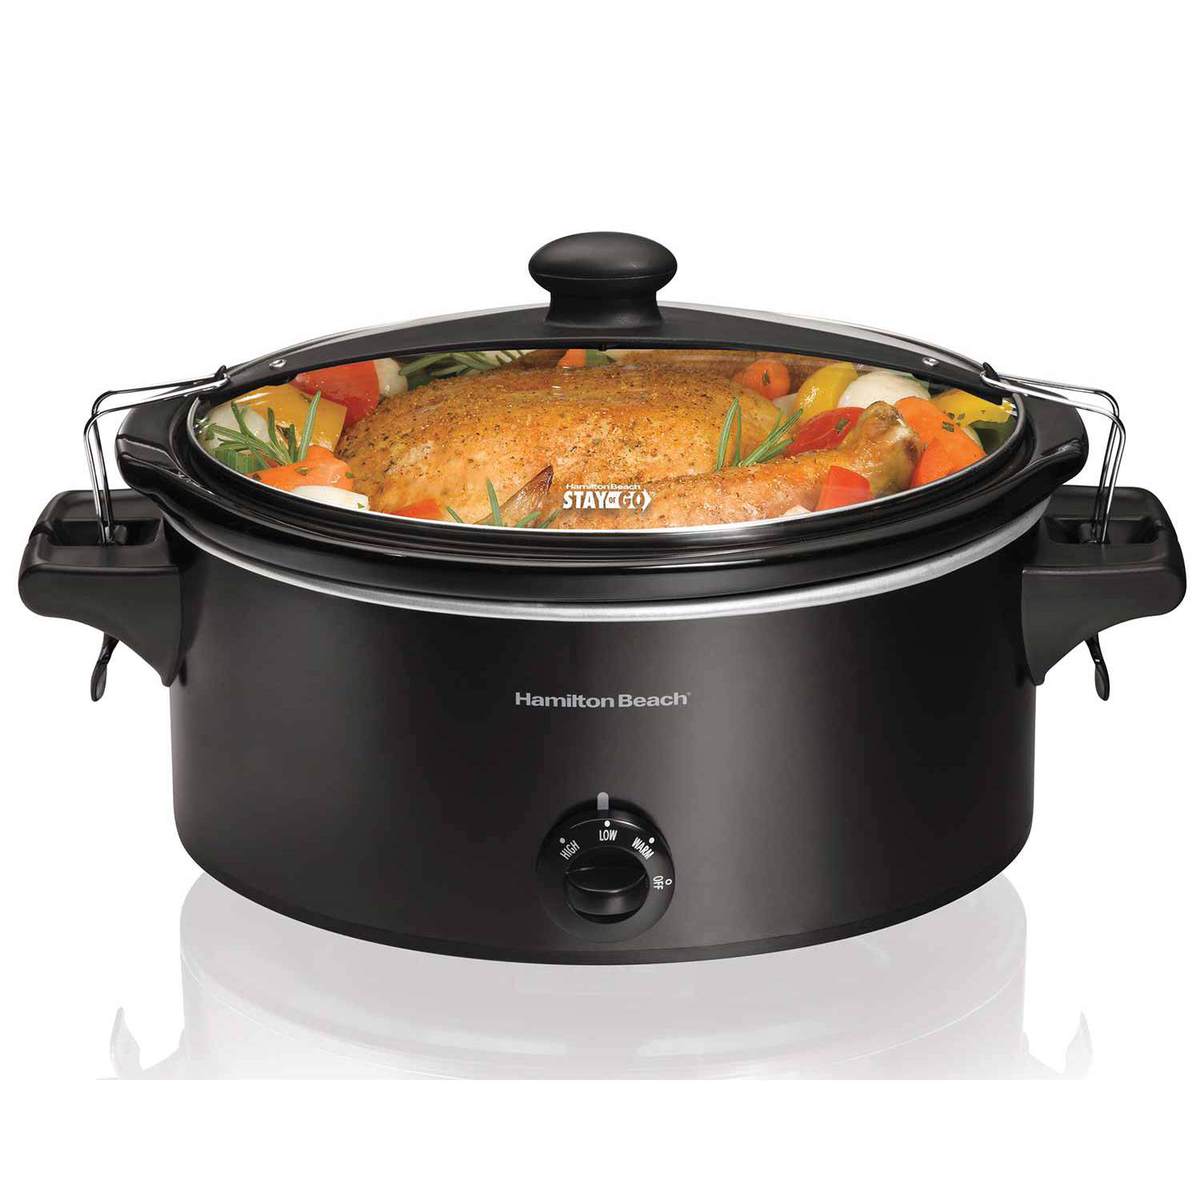 Stay or Go® 6 Quart Slow Cooker (33261)